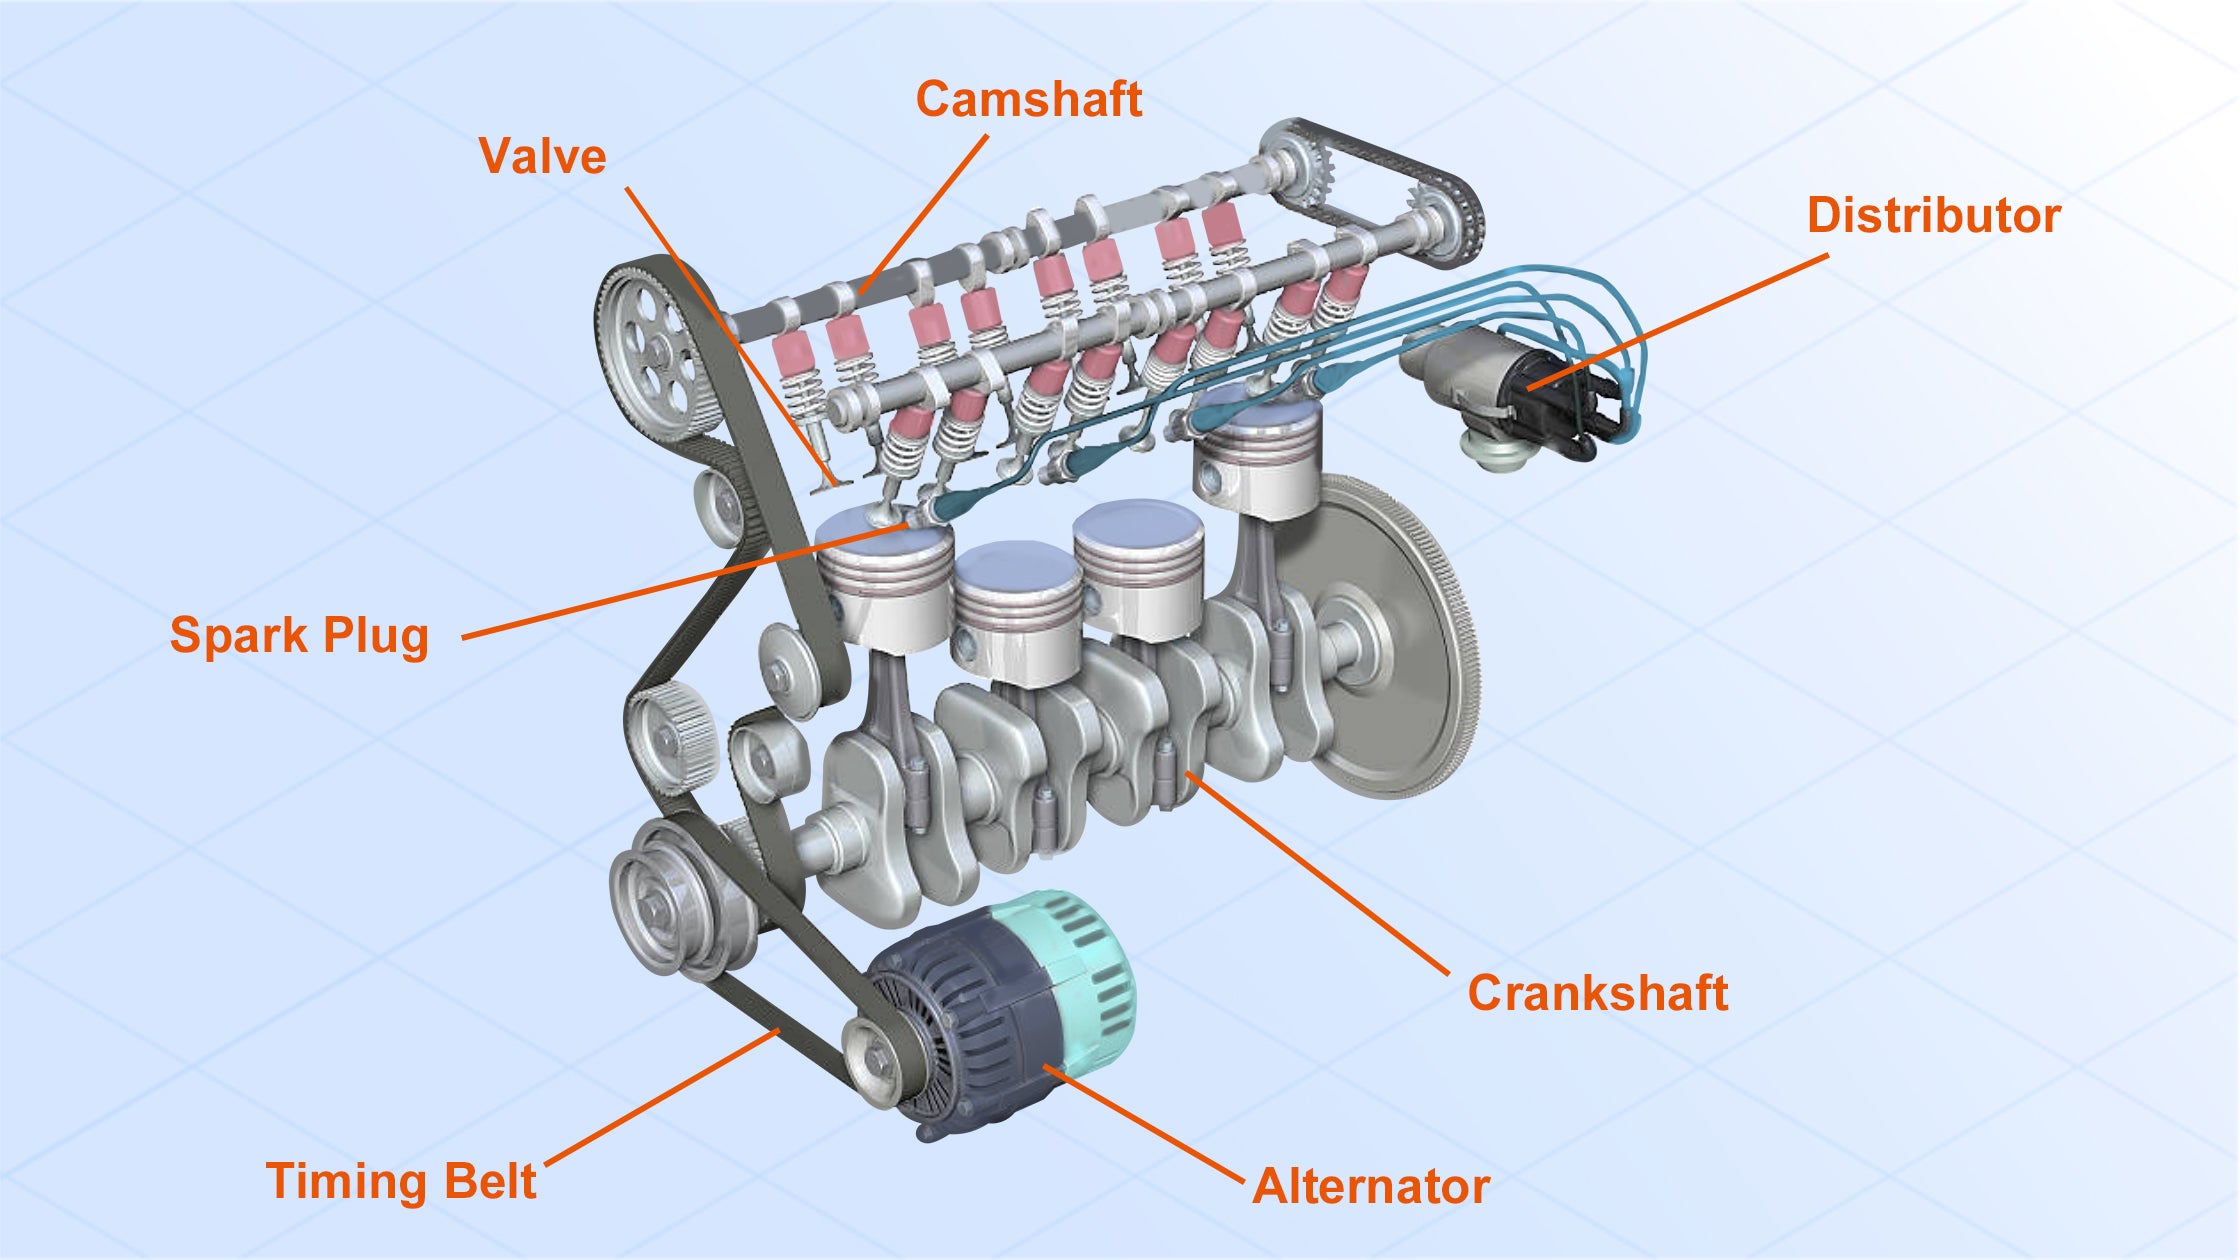 What is a Camshaft and What does it do?